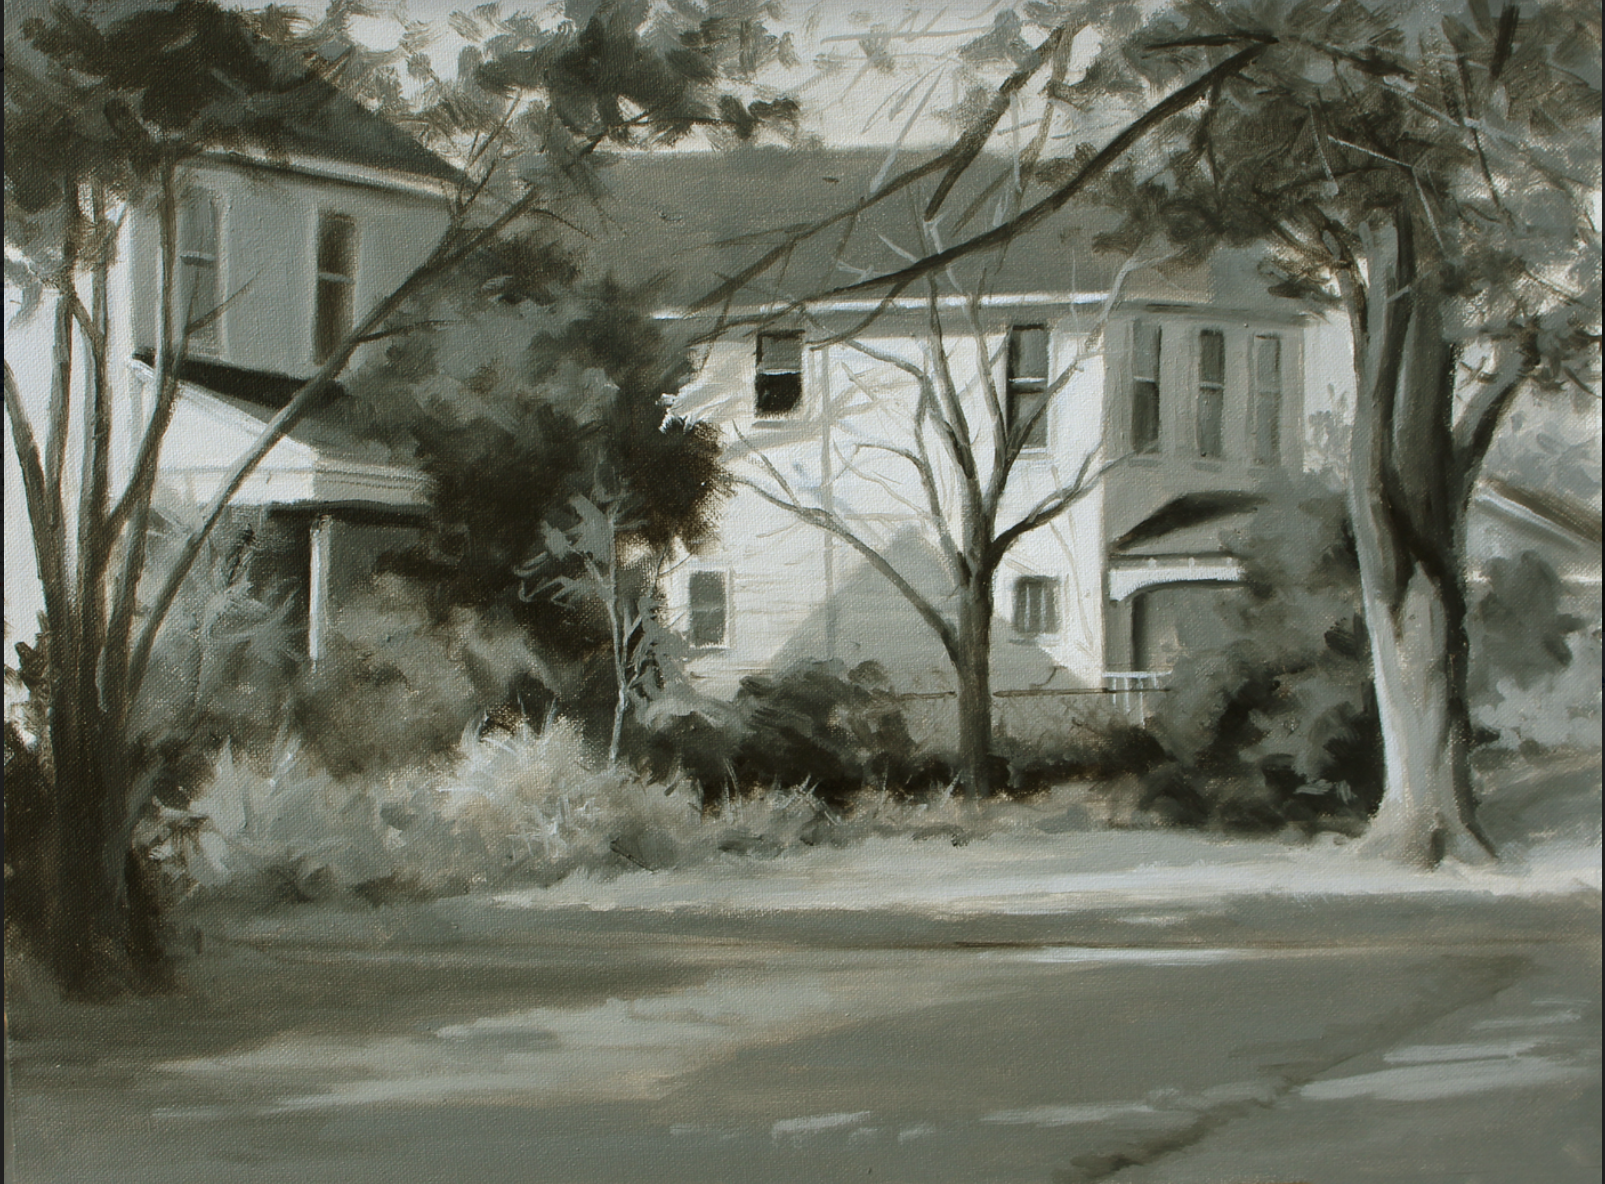 John's value study, a practice he uses for painting landscapes